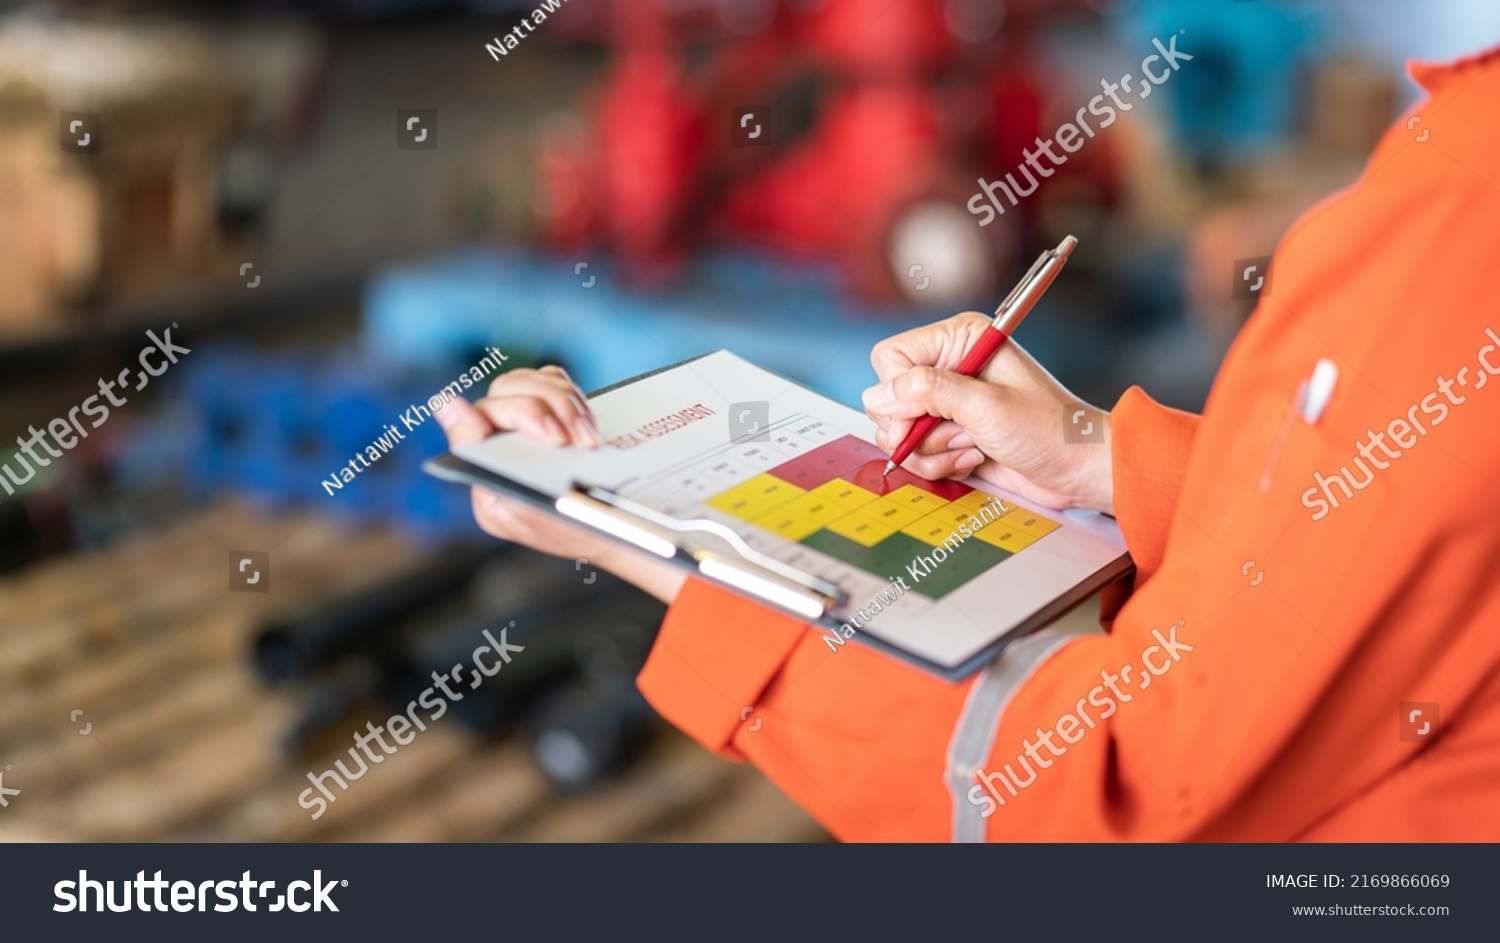 The manager is using ballpoint pen to marking on the risk assessment matrix at "High risk" level, with blurred background of factory place. Industrial and business working photo. #2169866069